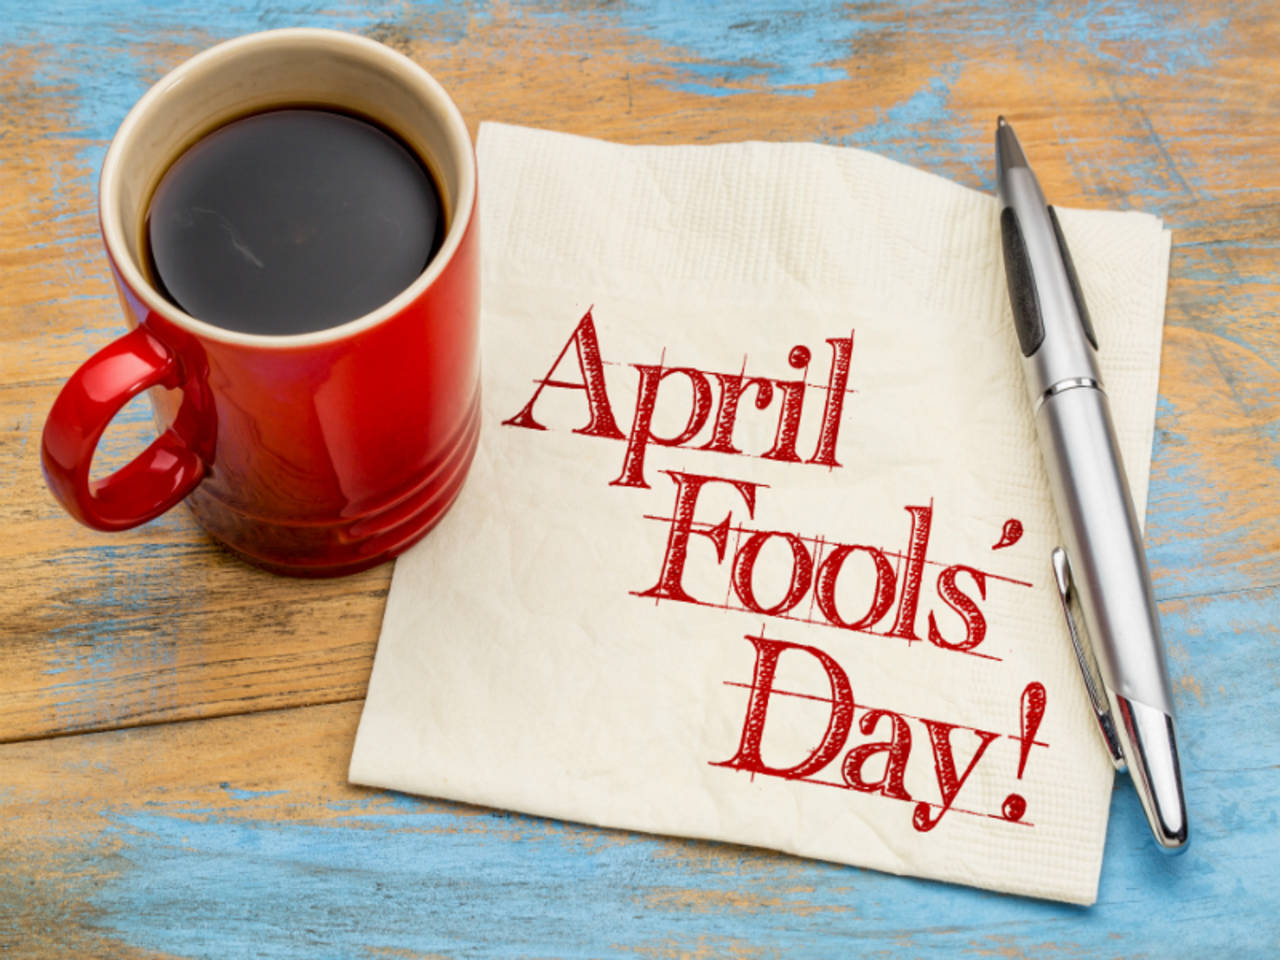 April Fool's Day 2019: Funny Wishes, Messages, Jokes, Pranks ...